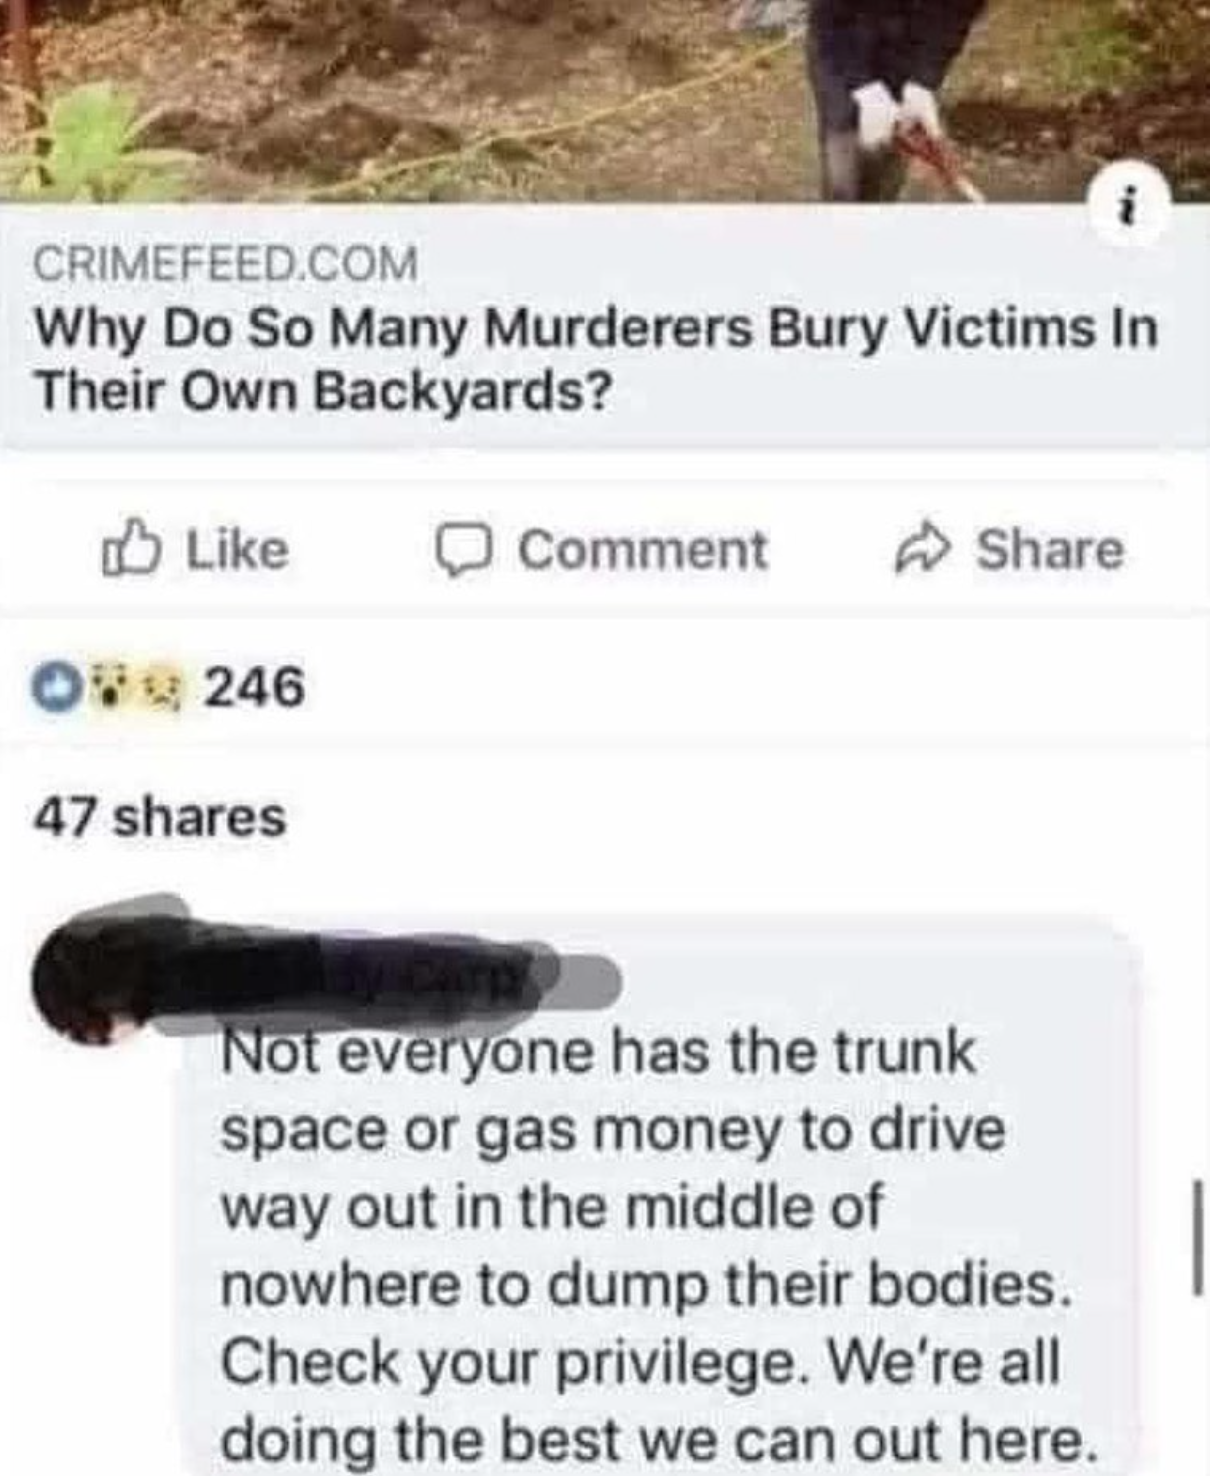 do so many murderers bury - Crimefeed.Com Why Do So Many Murderers Bury Victims In Their Own Backyards? ob Comment 08246 47 Not everyone has the trunk space or gas money to drive way out in the middle of nowhere to dump their bodies. Check your privilege.